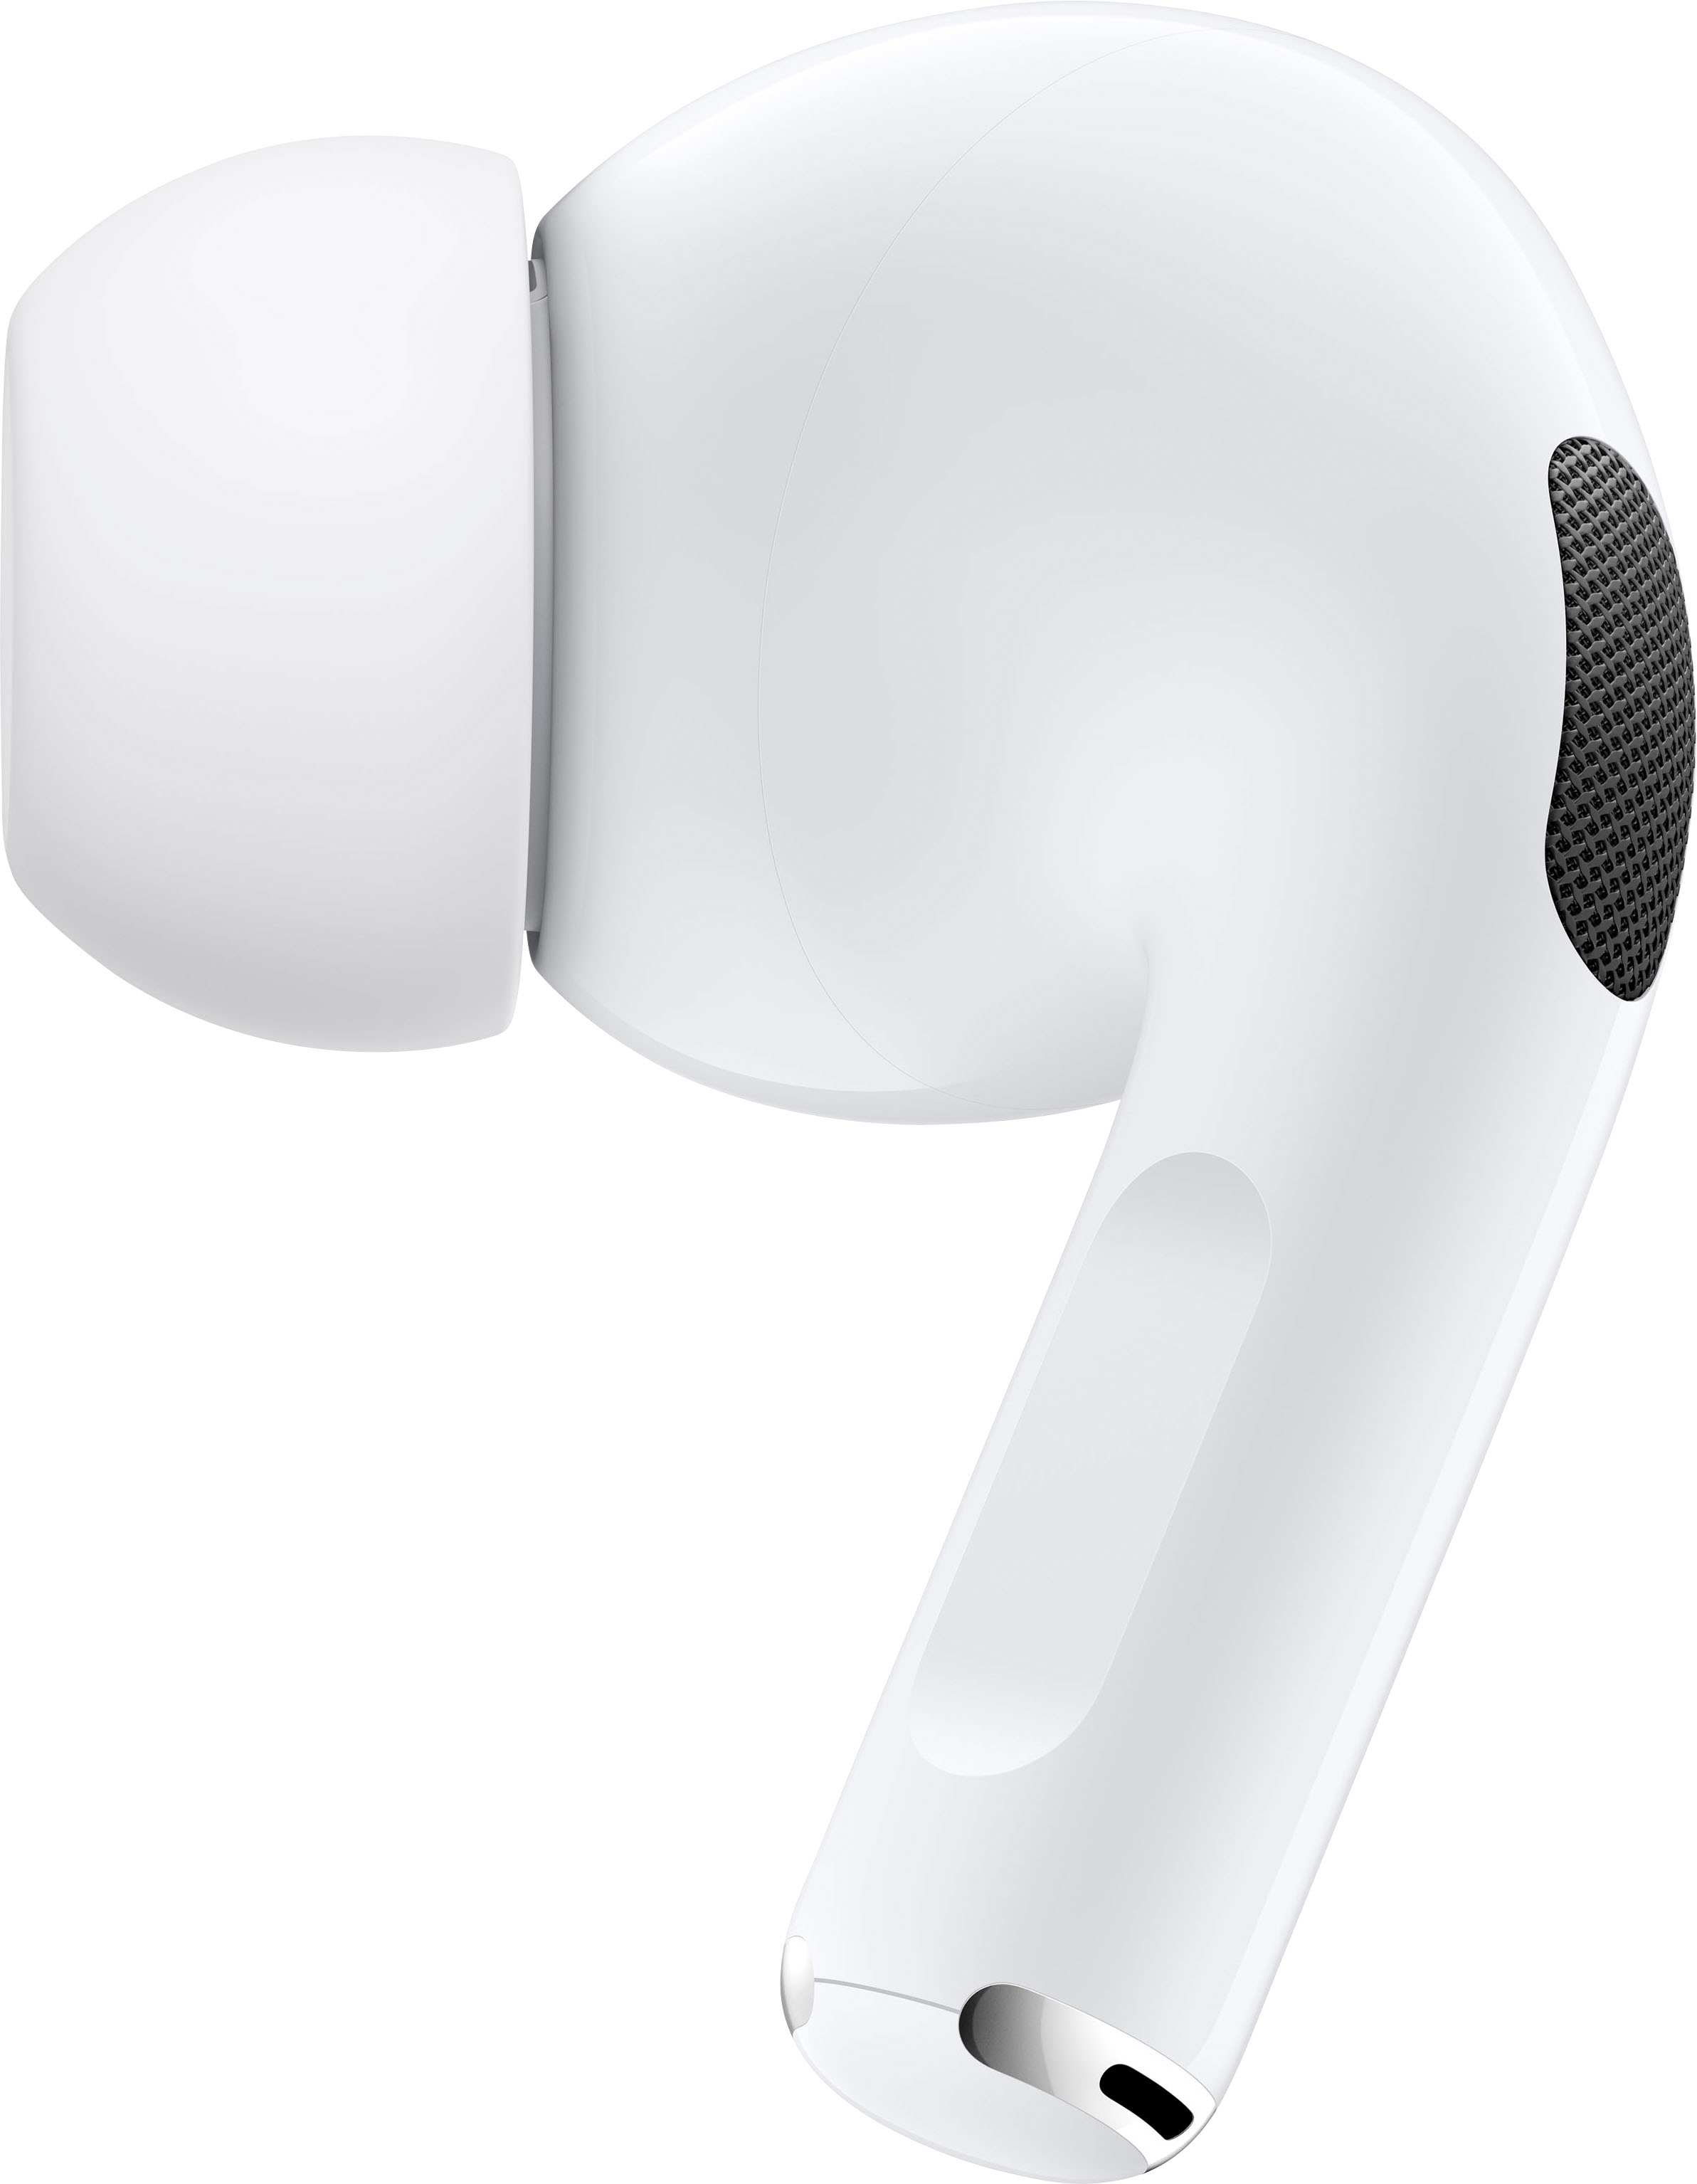 Apple AirPods Pro with Wireless Charging Case MWP22AM/A - Adorama